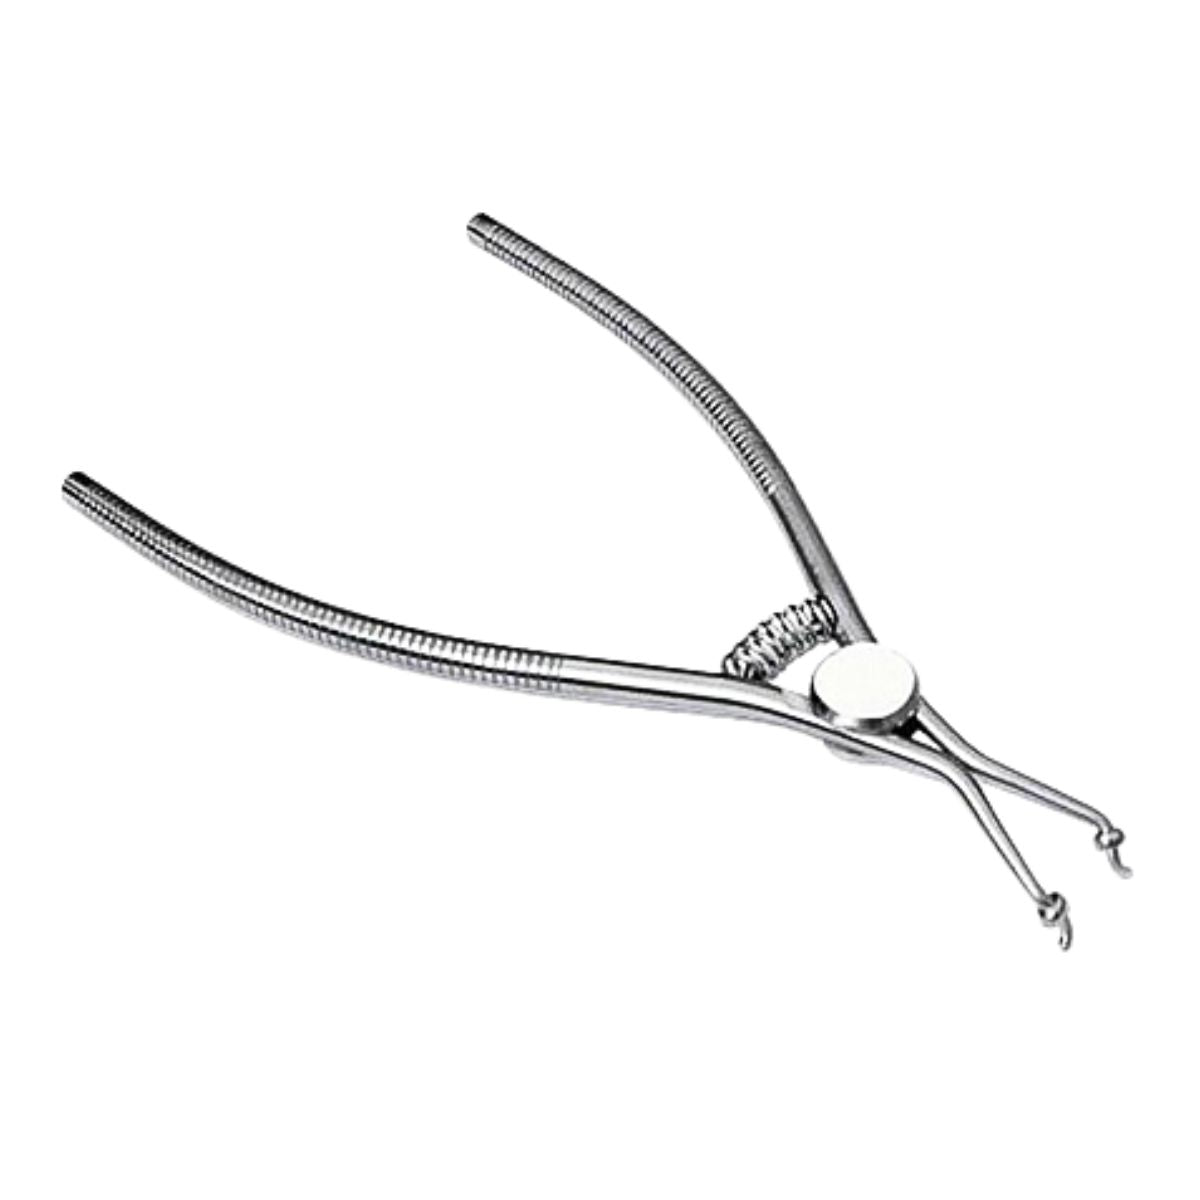 Tor VM Matrix Forceps With Stoppers 10992 Universal Holder